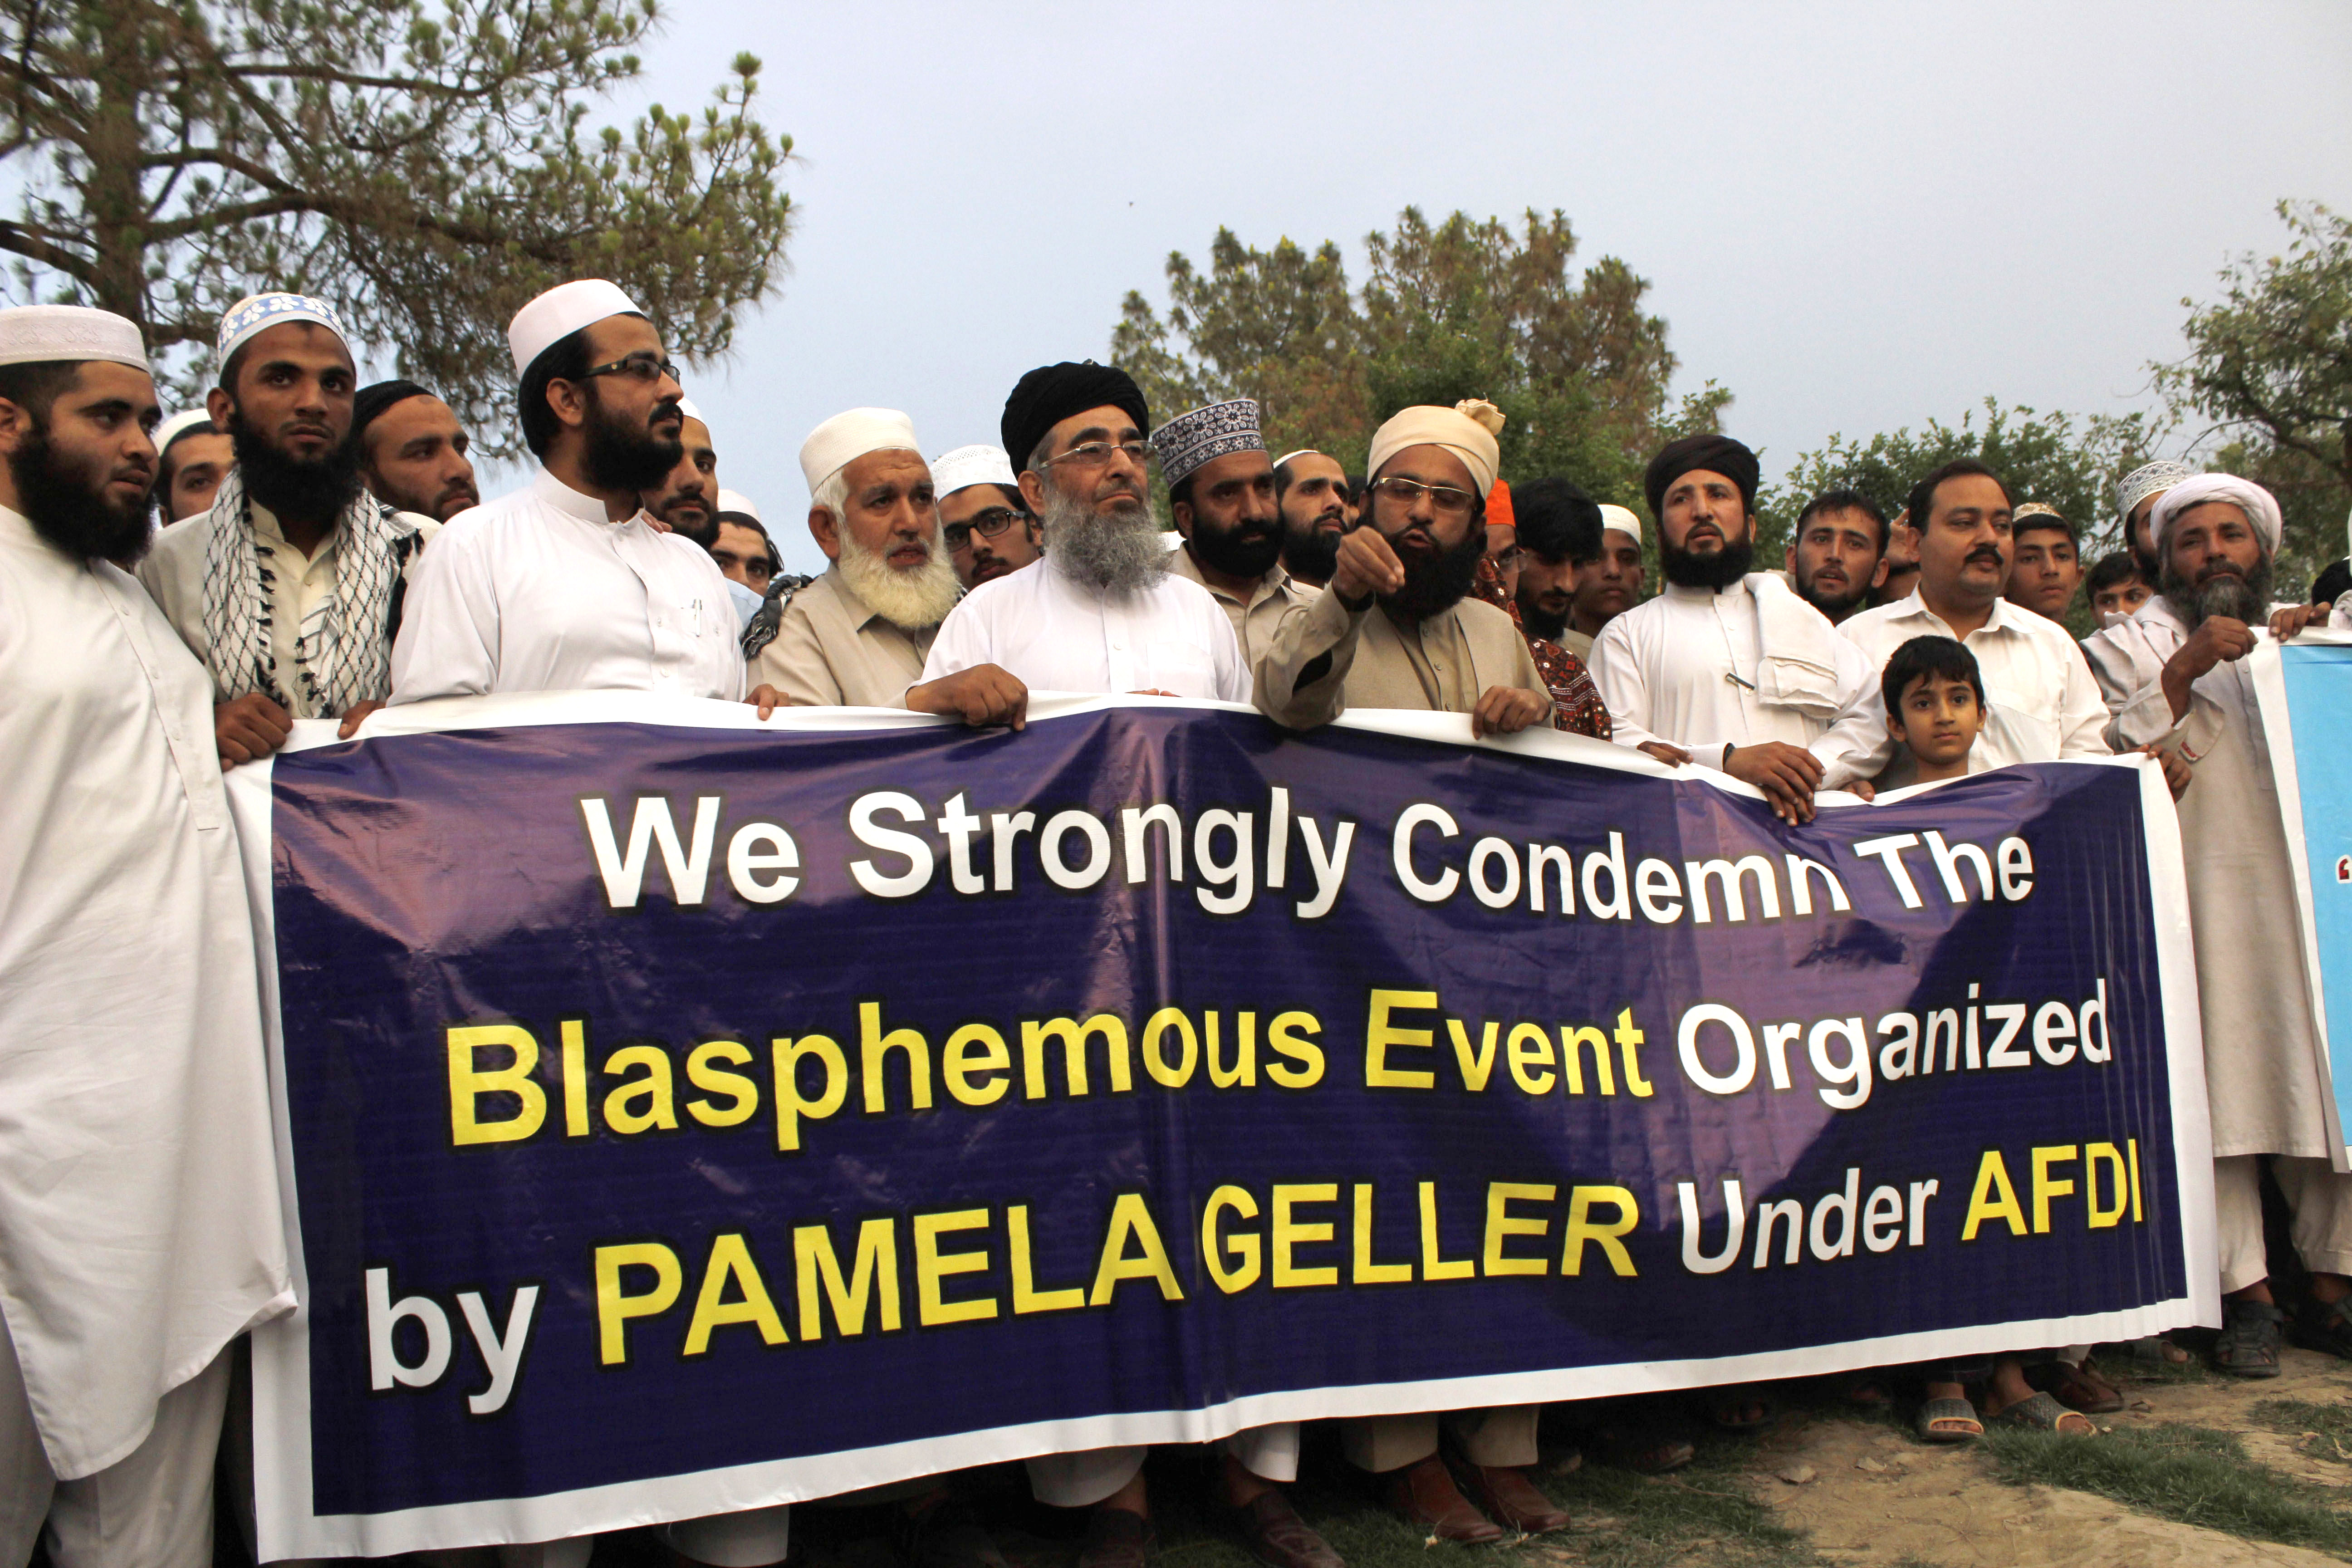 Pakistanis protest the event held by Pam Geller in Texas.